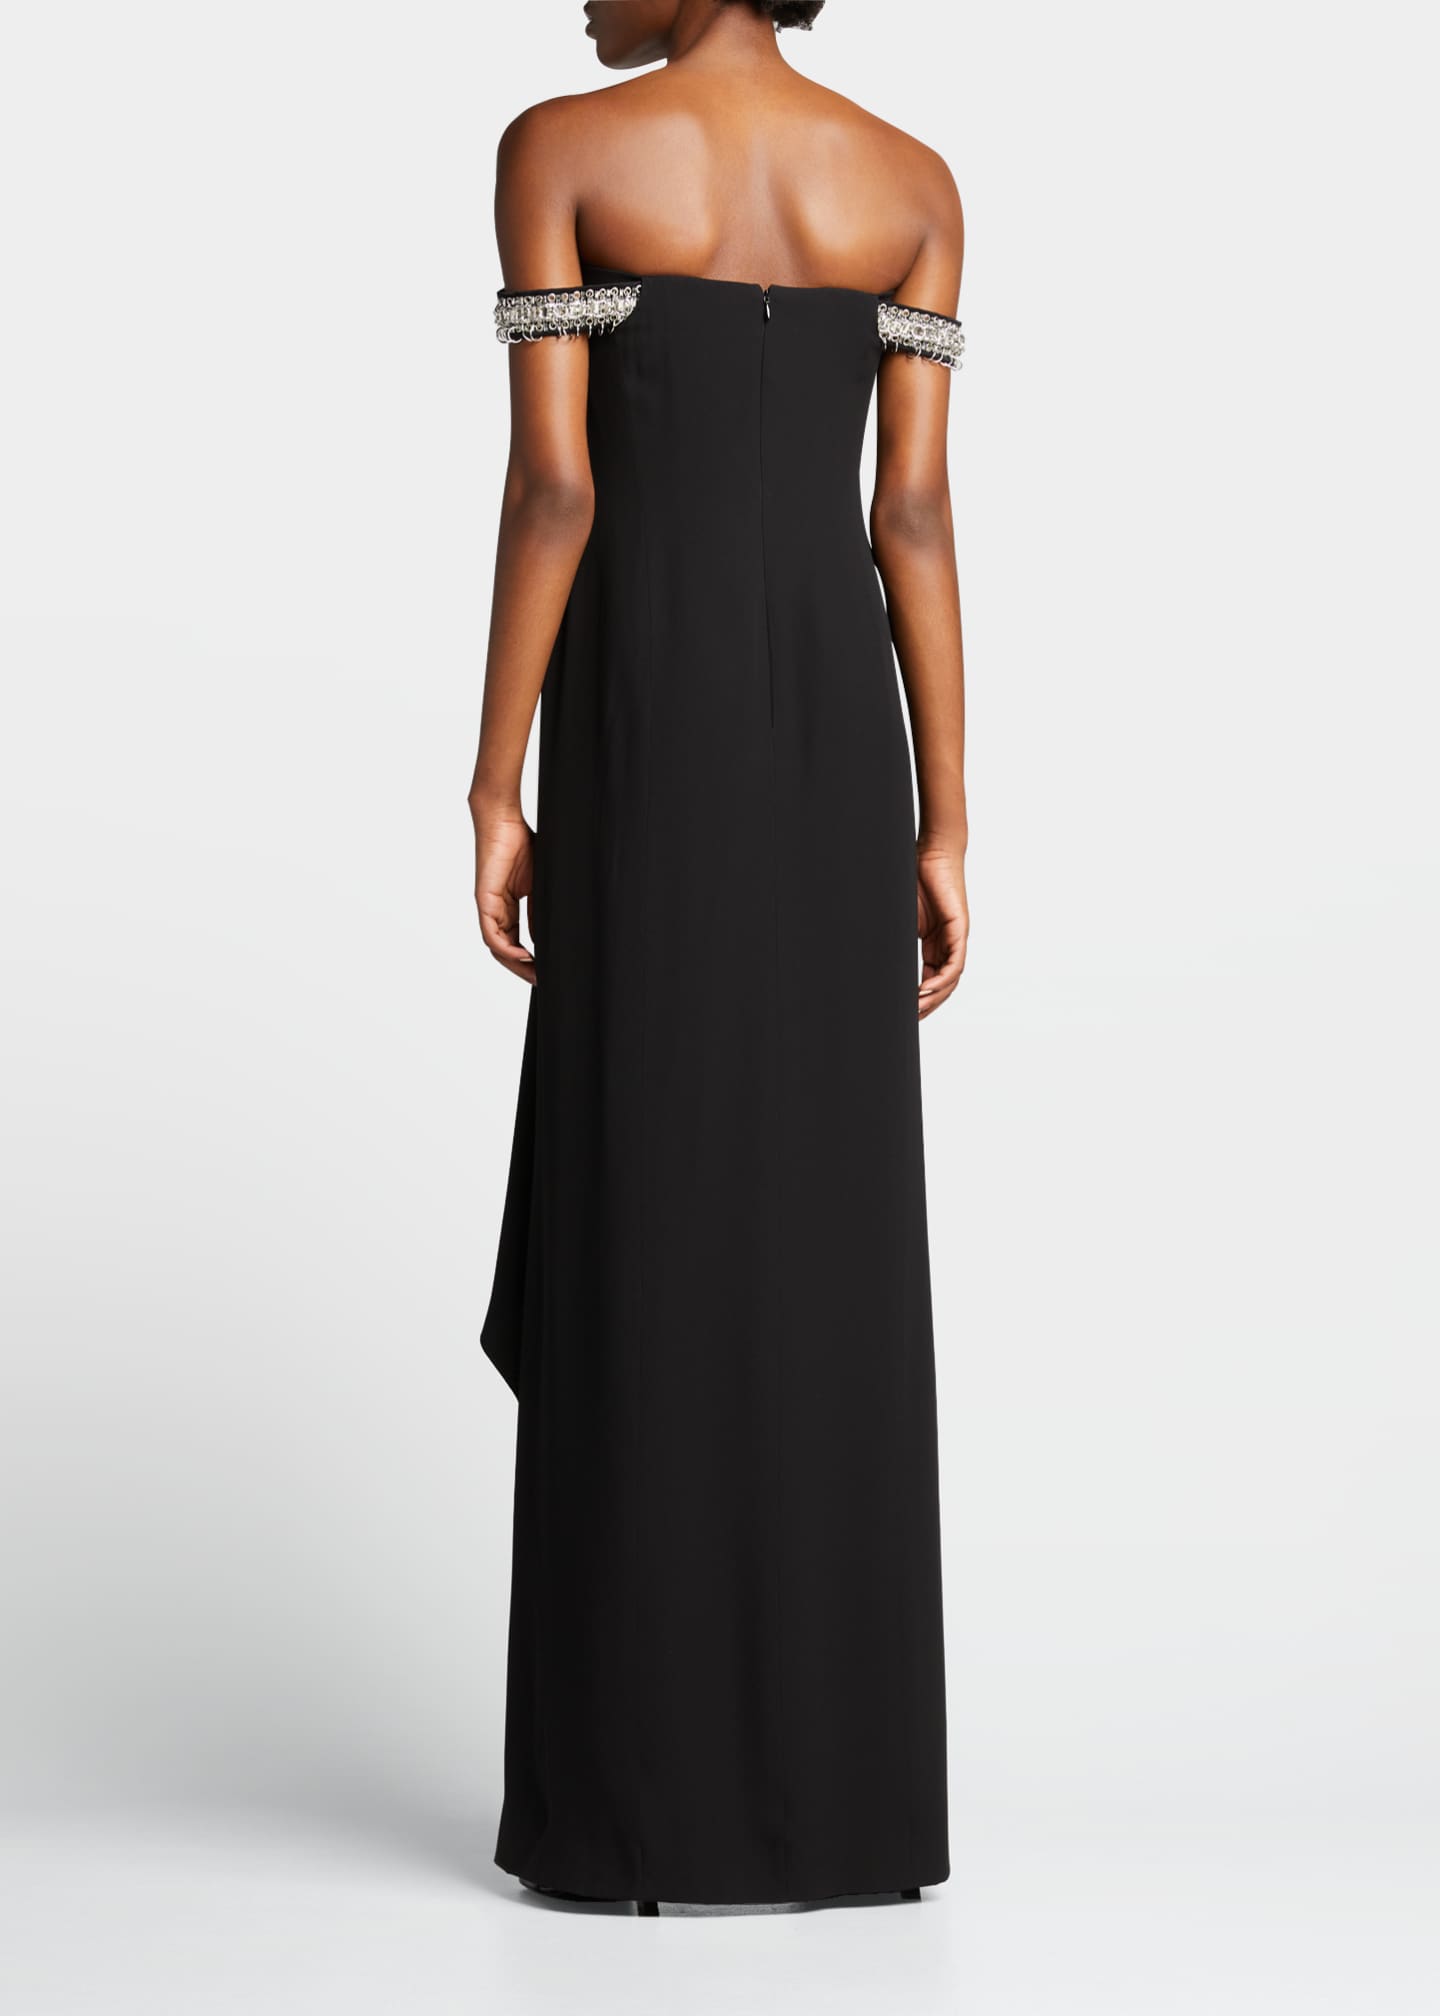 Givenchy Jeweled Strass Eyelet Off-The-Shoulder Gown - Bergdorf Goodman